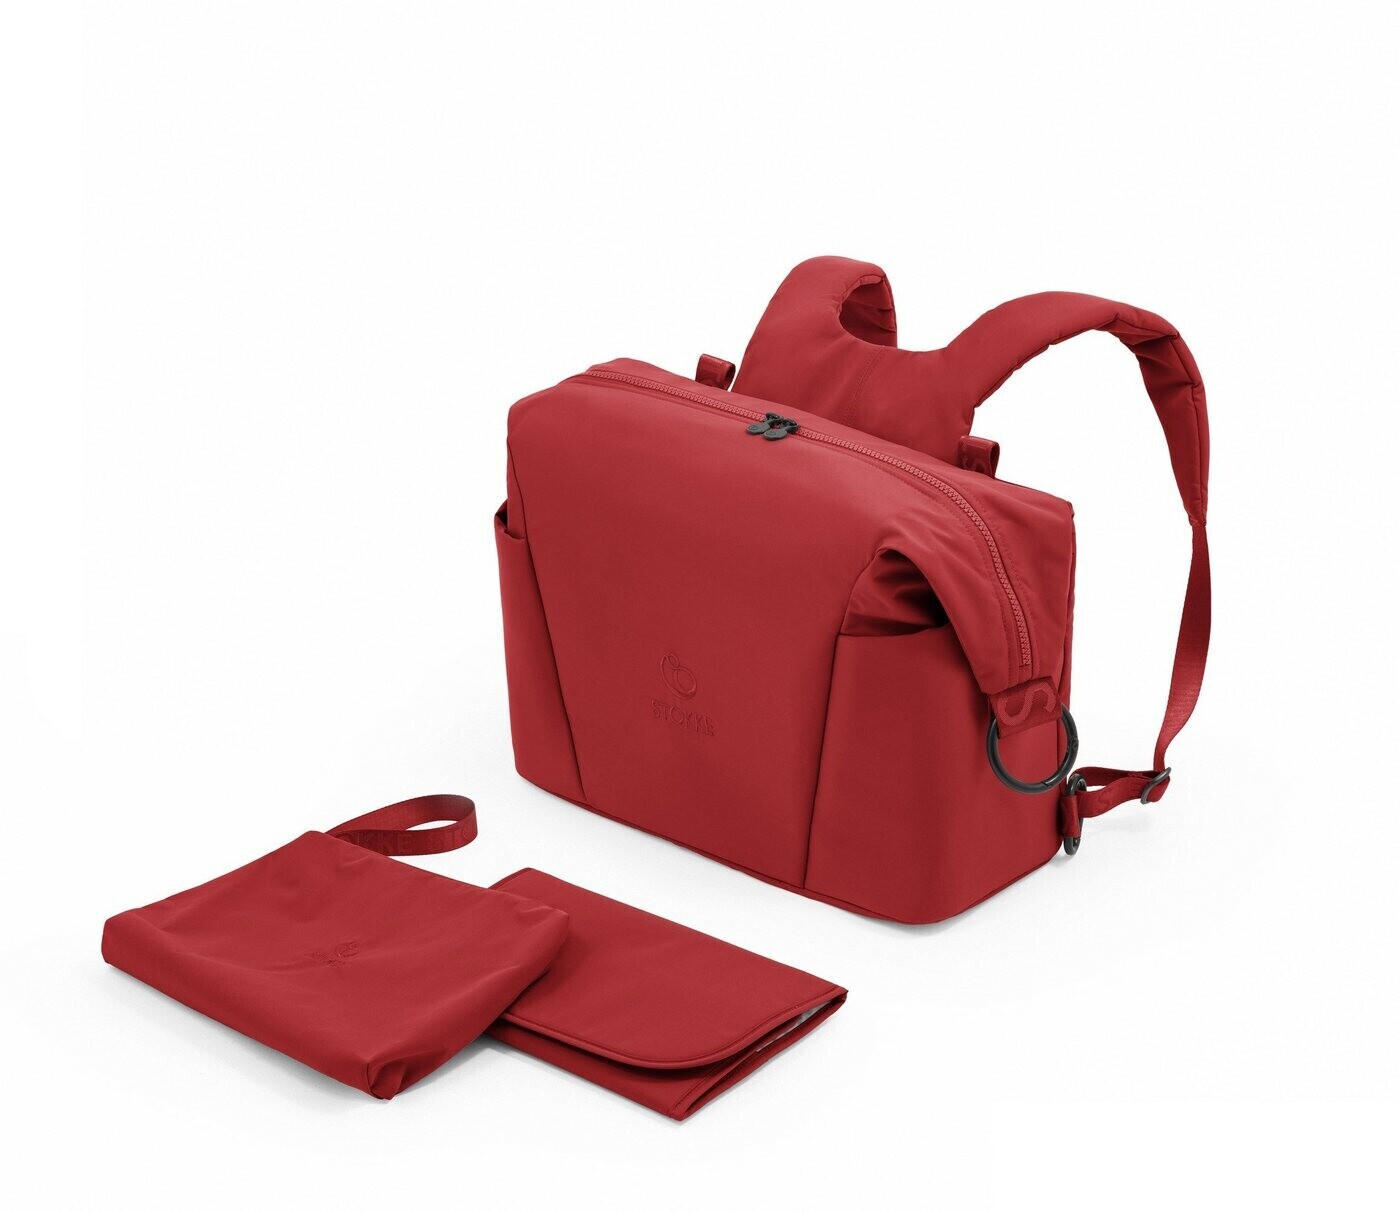 Stokke Xplory X Changing Bag ruby red